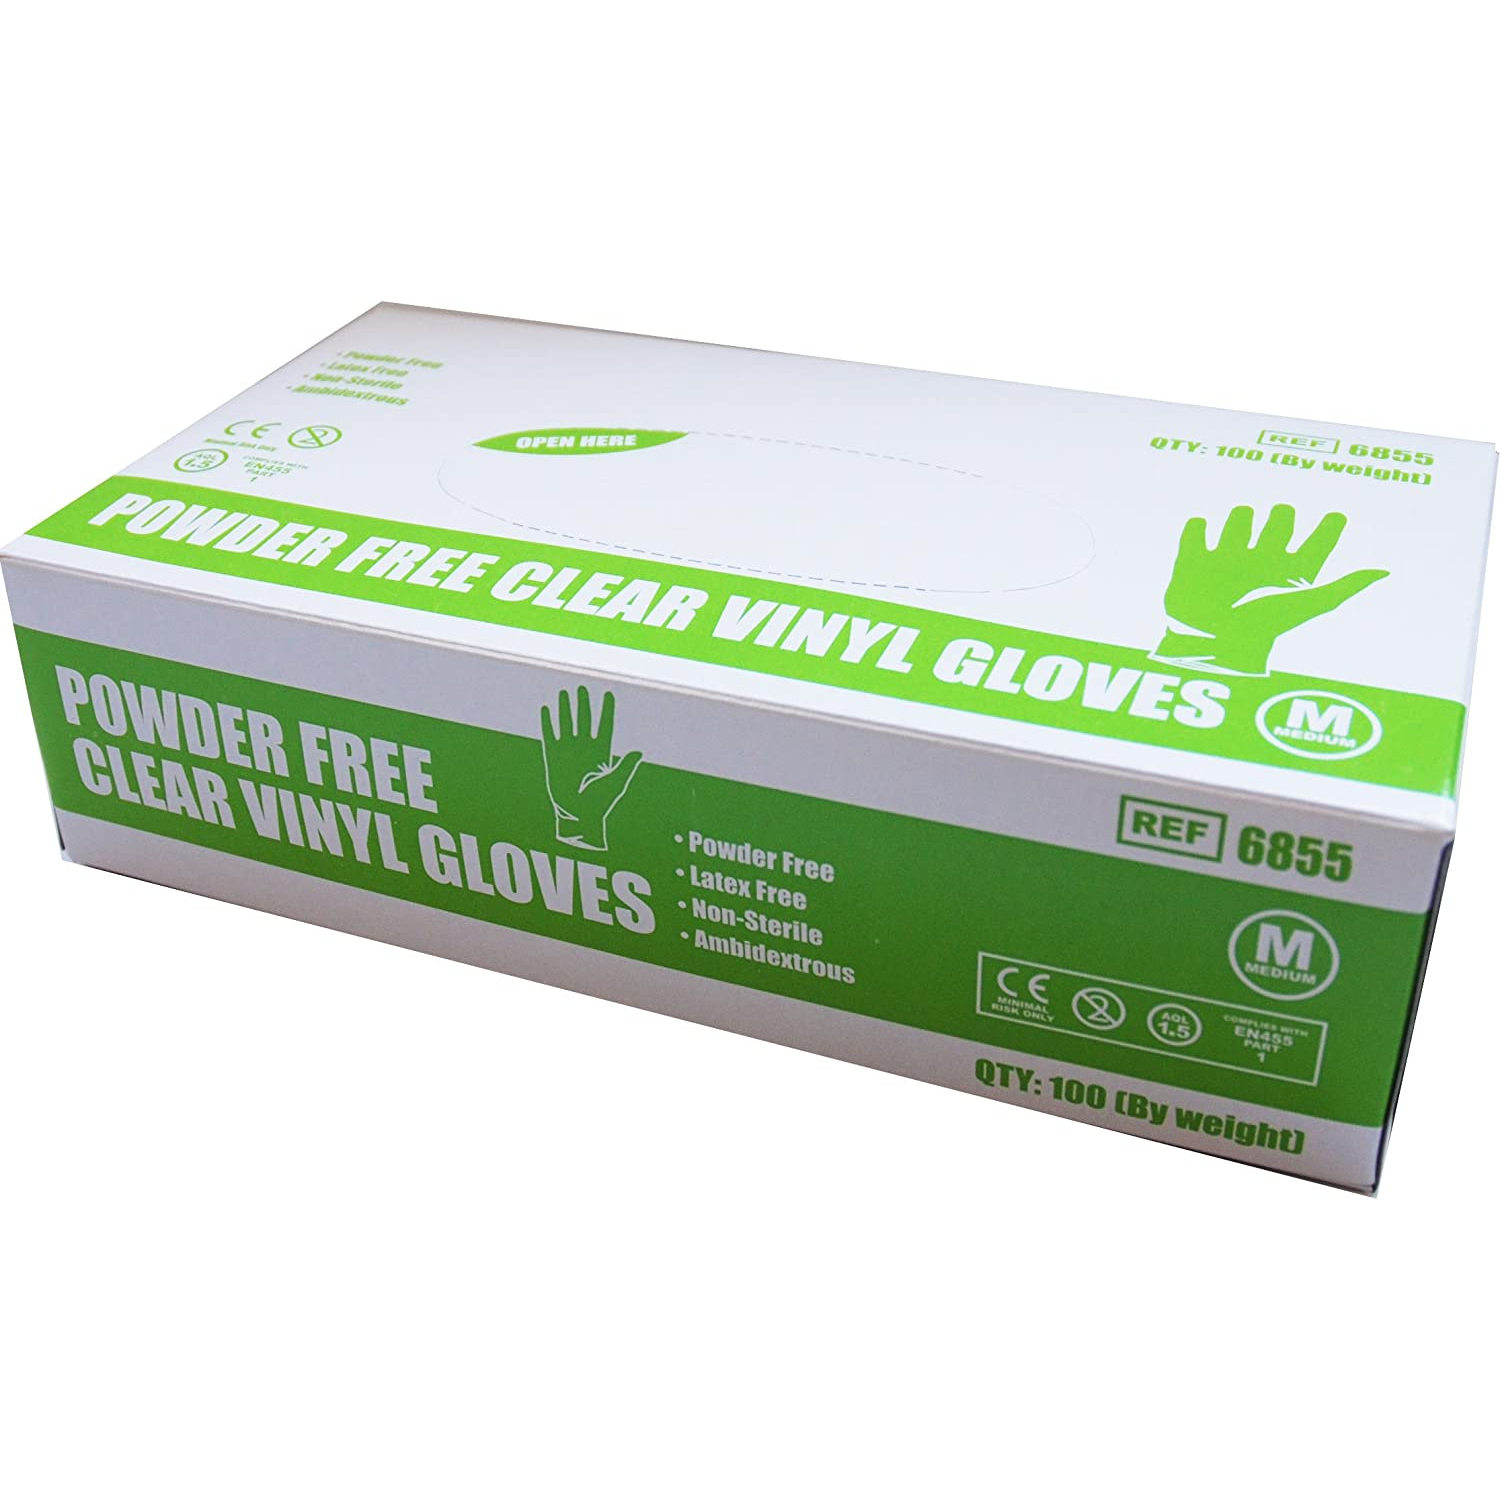 Safecare Vinyl Gloves | Powder Free | Clear | Small | Pack of 100 (1)